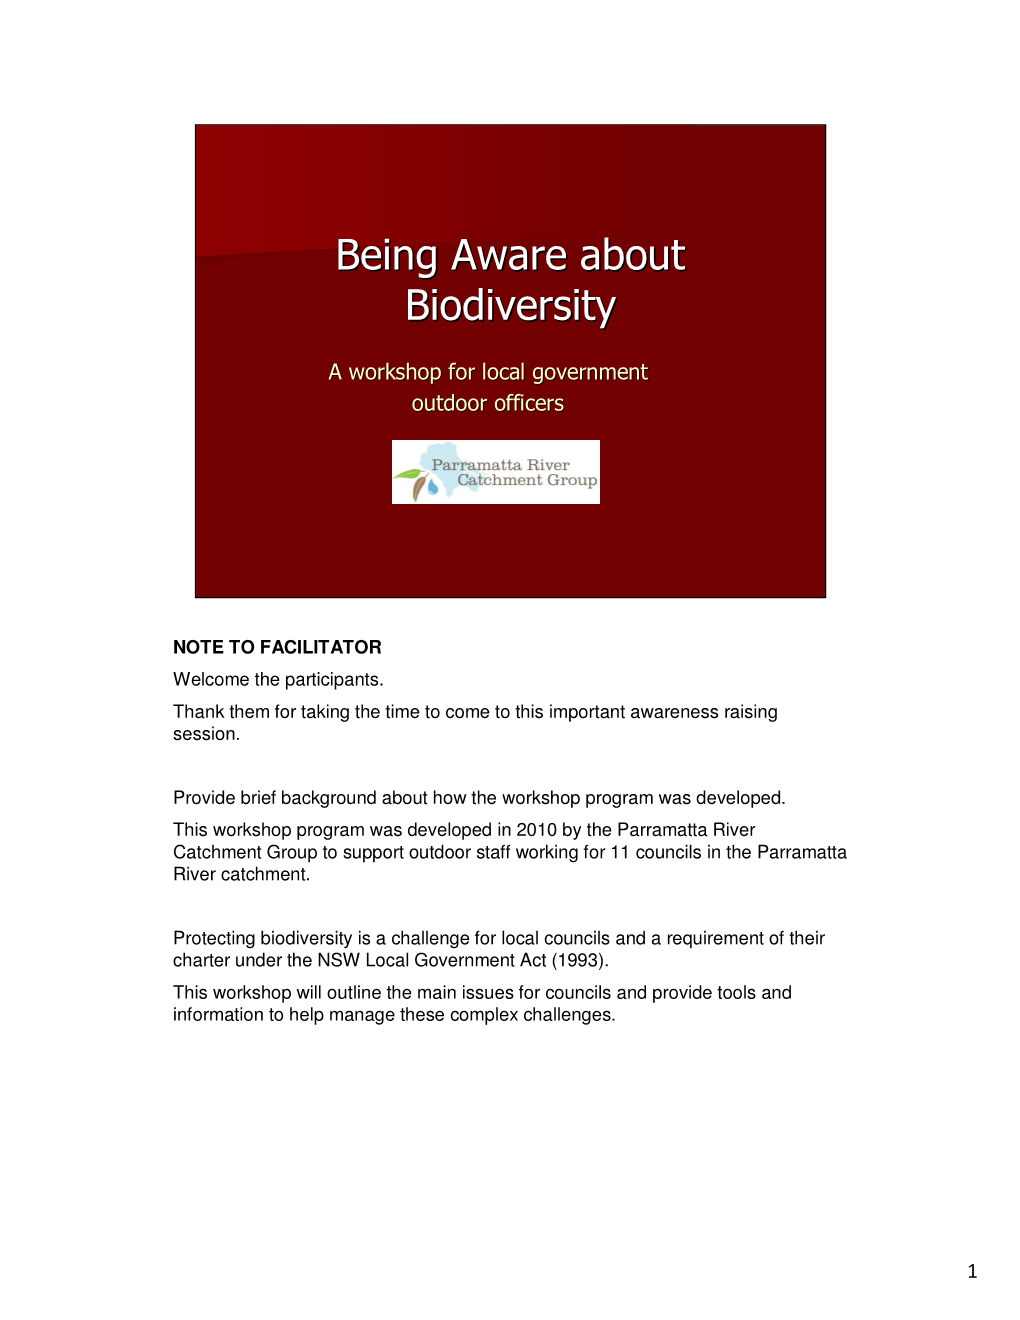 Being Aware About Biodiversity